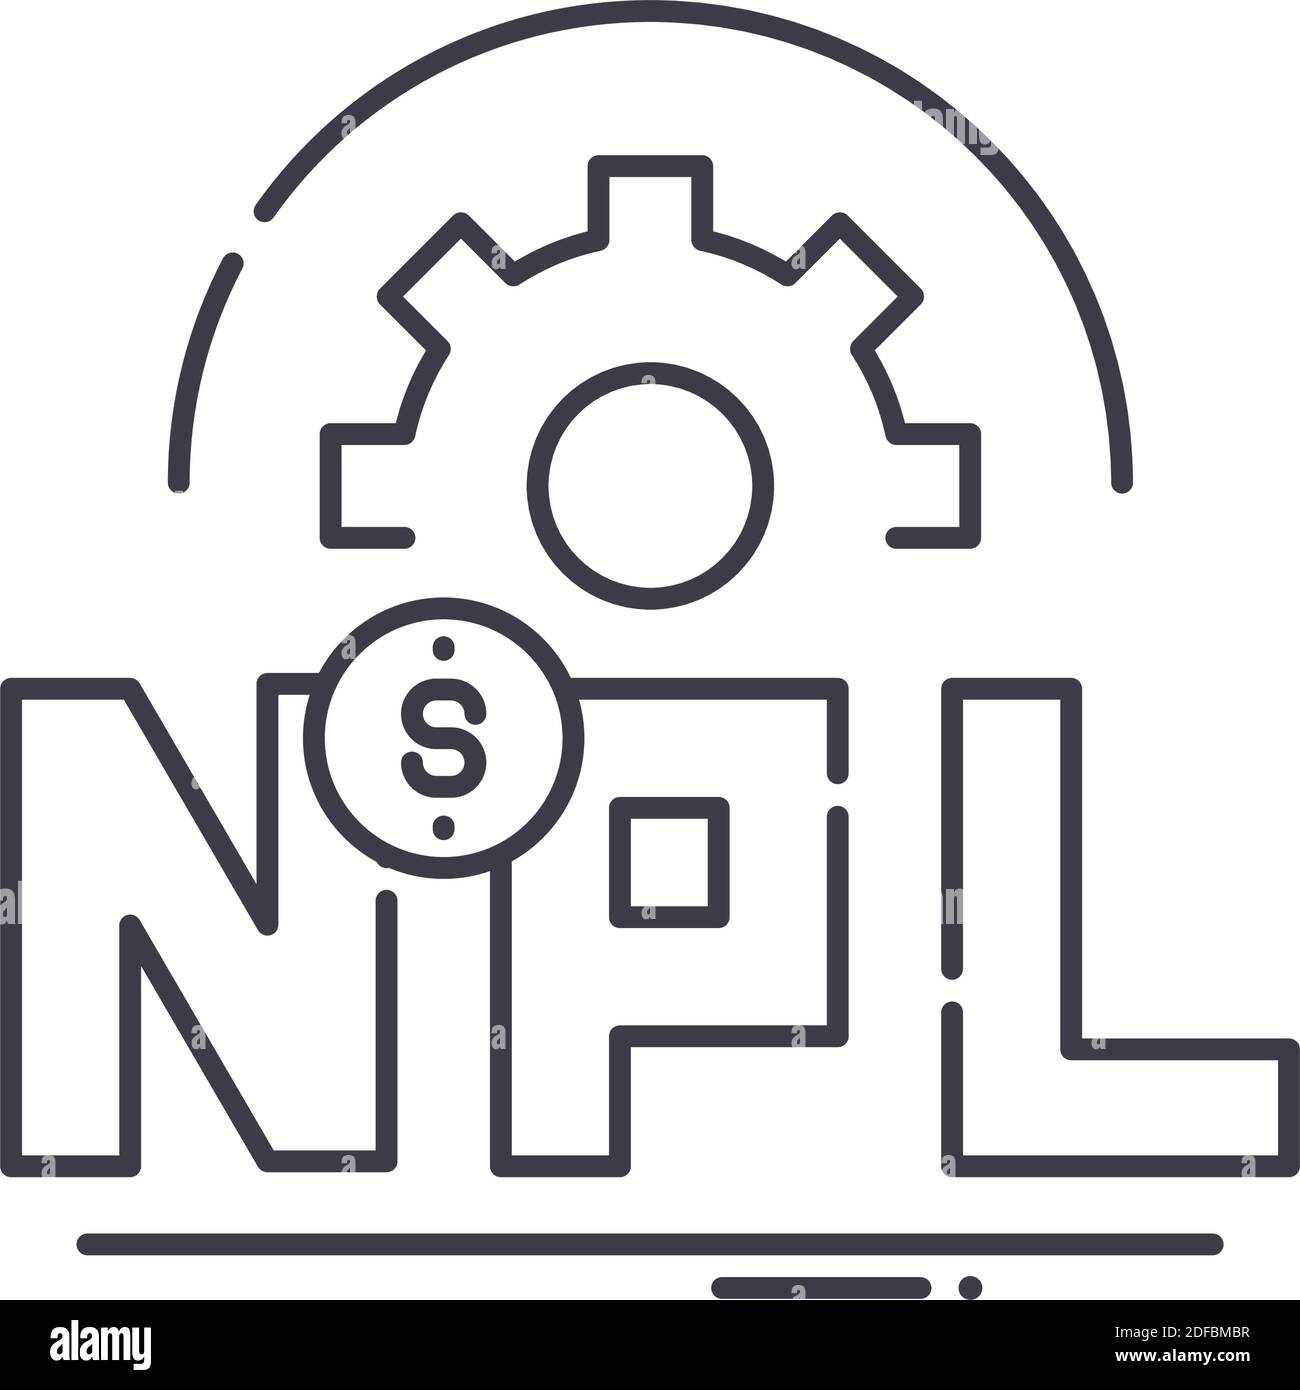 Npl icon, linear isolated illustration, thin line vector, web design sign, outline concept symbol with editable stroke on white background. Stock Vector